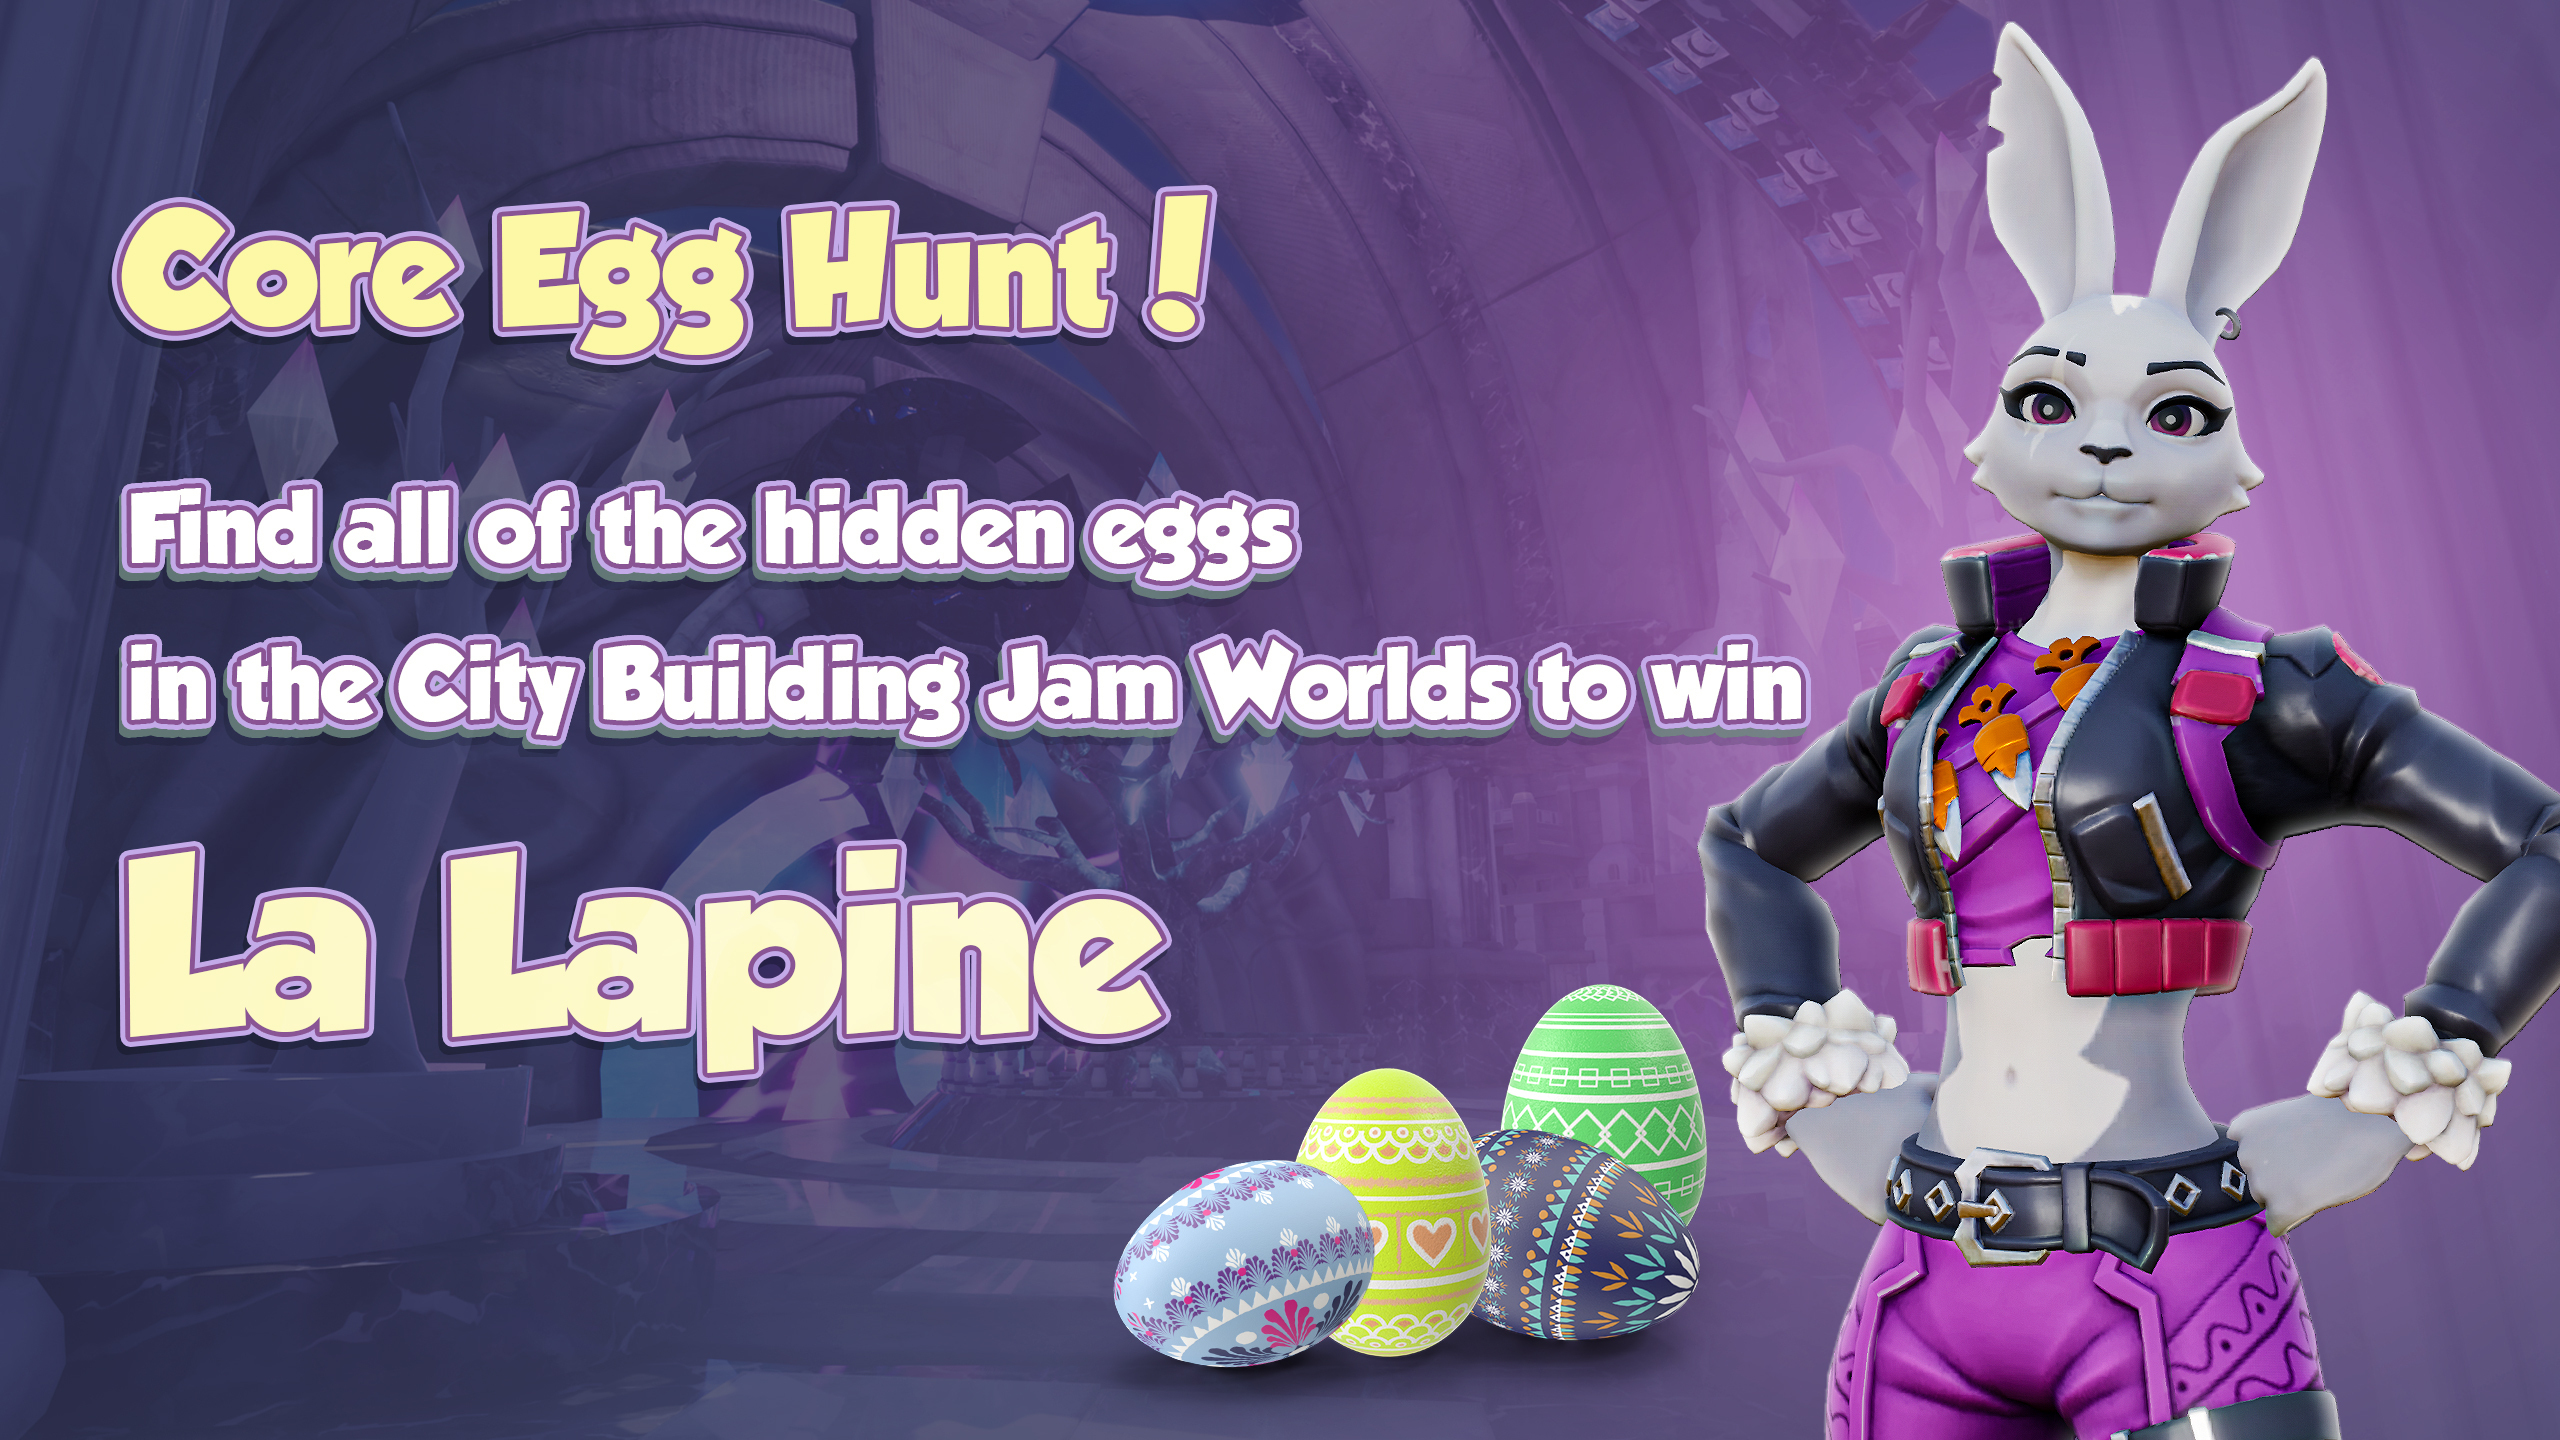 Core On Twitter The Core Egg Hunt Starts Now Explore The Best Of The City Building Jam And Collect The Hidden Eggs To Receive La Lapine Our Bunny Character Be Quick As - roblox egg hunt 2021 lost eggs